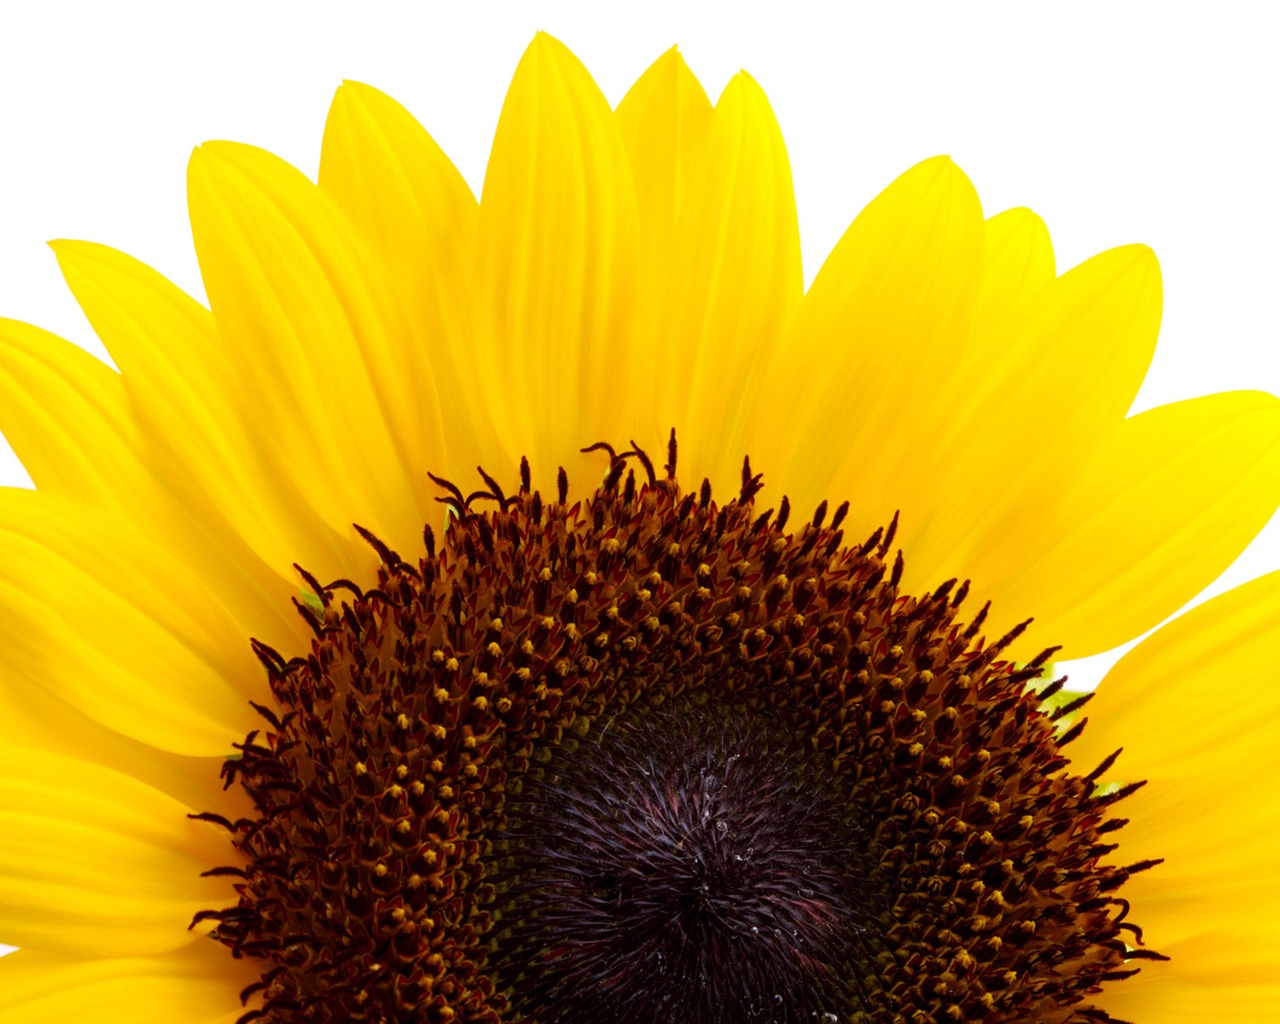 Sunny sunflower photo HD Wallpapers #18 - 1280x1024